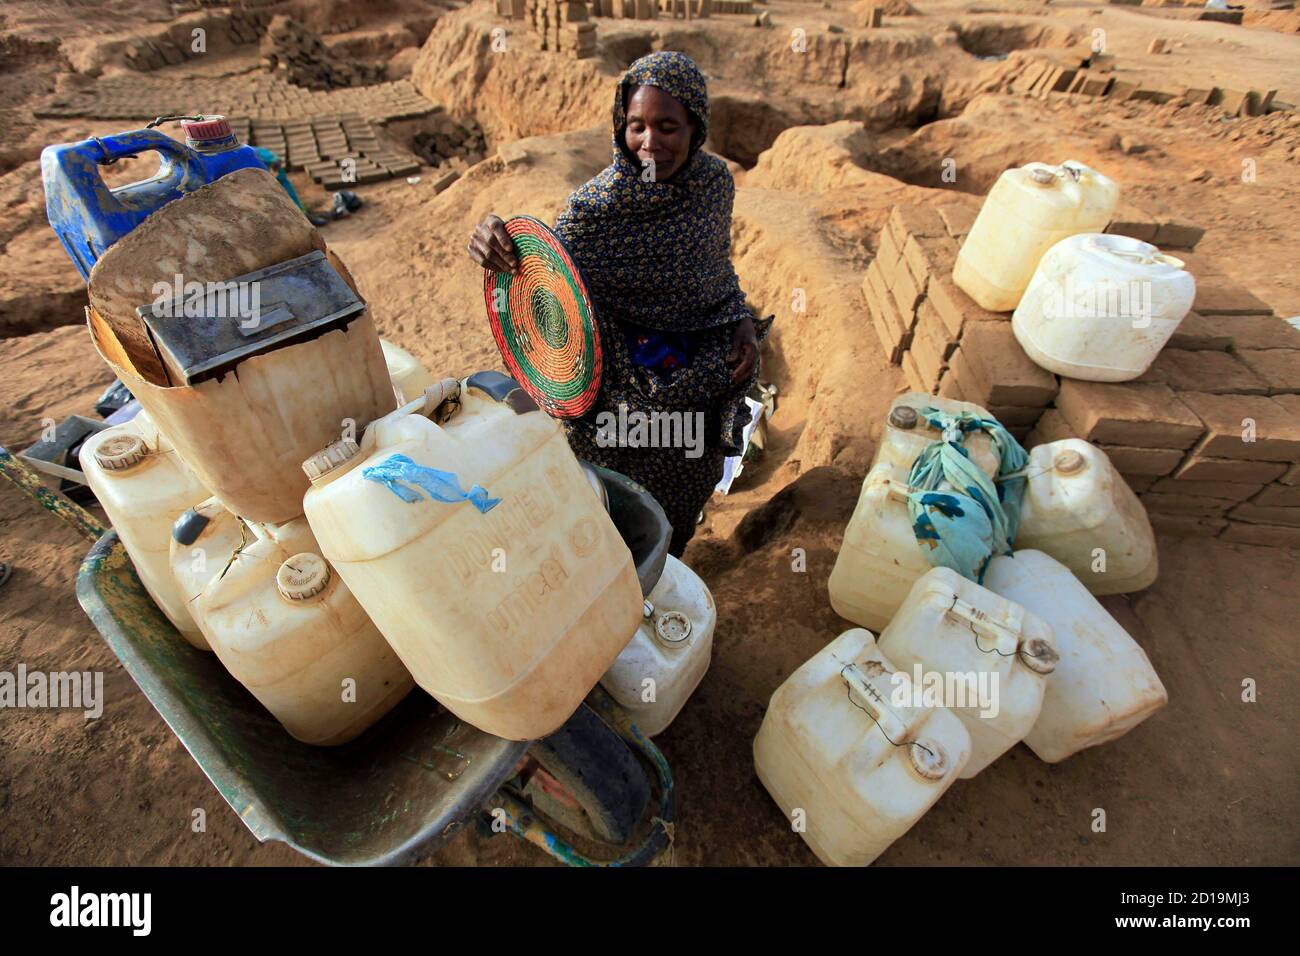 A displaced Sudanese woman prepares her containers in search of water at the Abu Shouk IDP (internally displaced persons) camp in Al Fasher, northern Darfur April 8, 2010. REUTERS/Zohra Bensemra (SUDAN - Tags: SOCIETY) Stock Photo